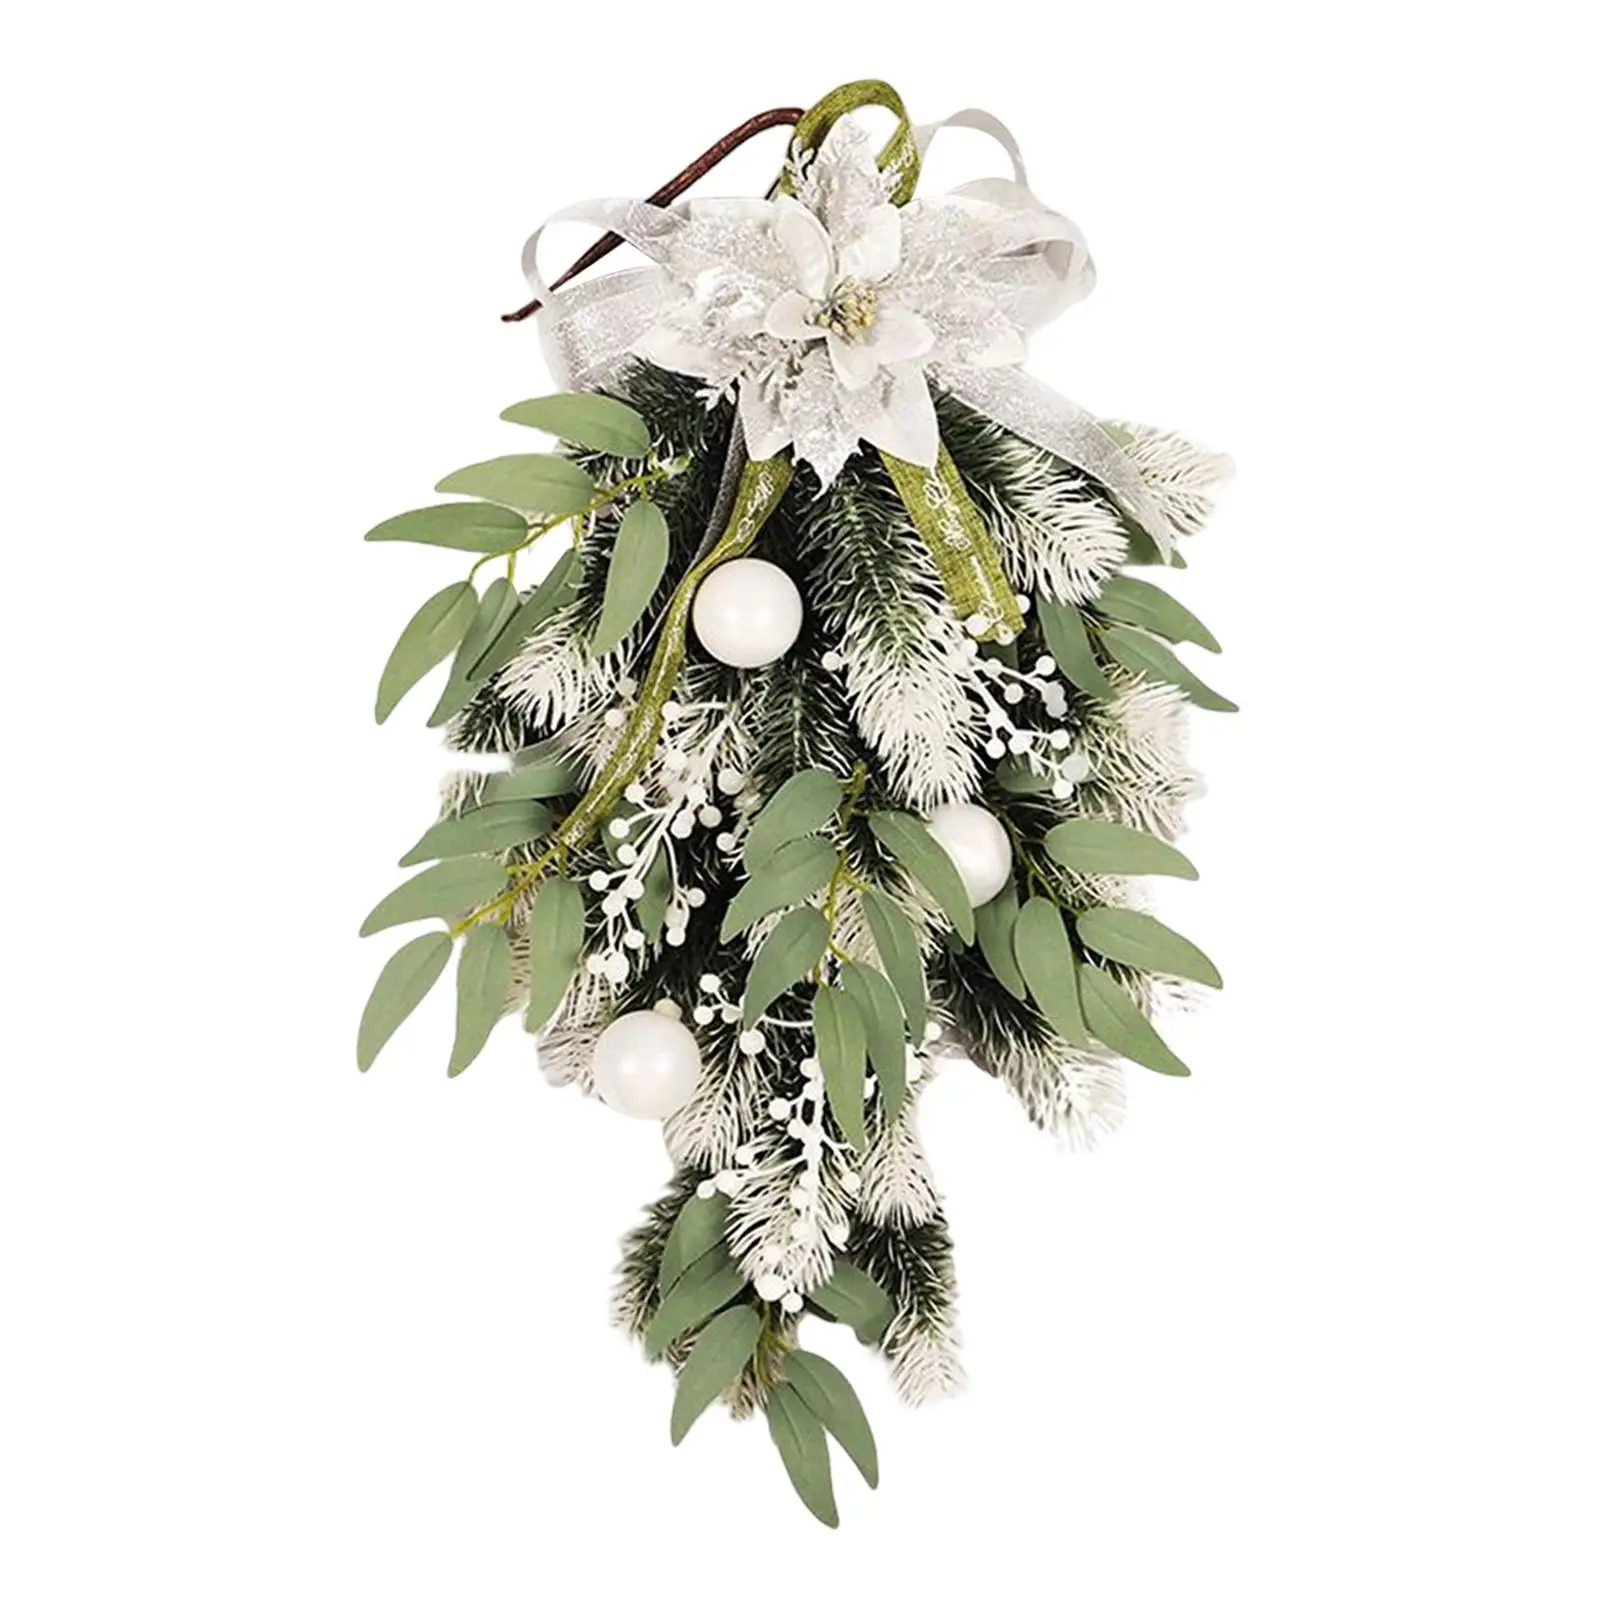 Artificial Christmas Teardrop Swag Wreath Garland Swag for Decorations